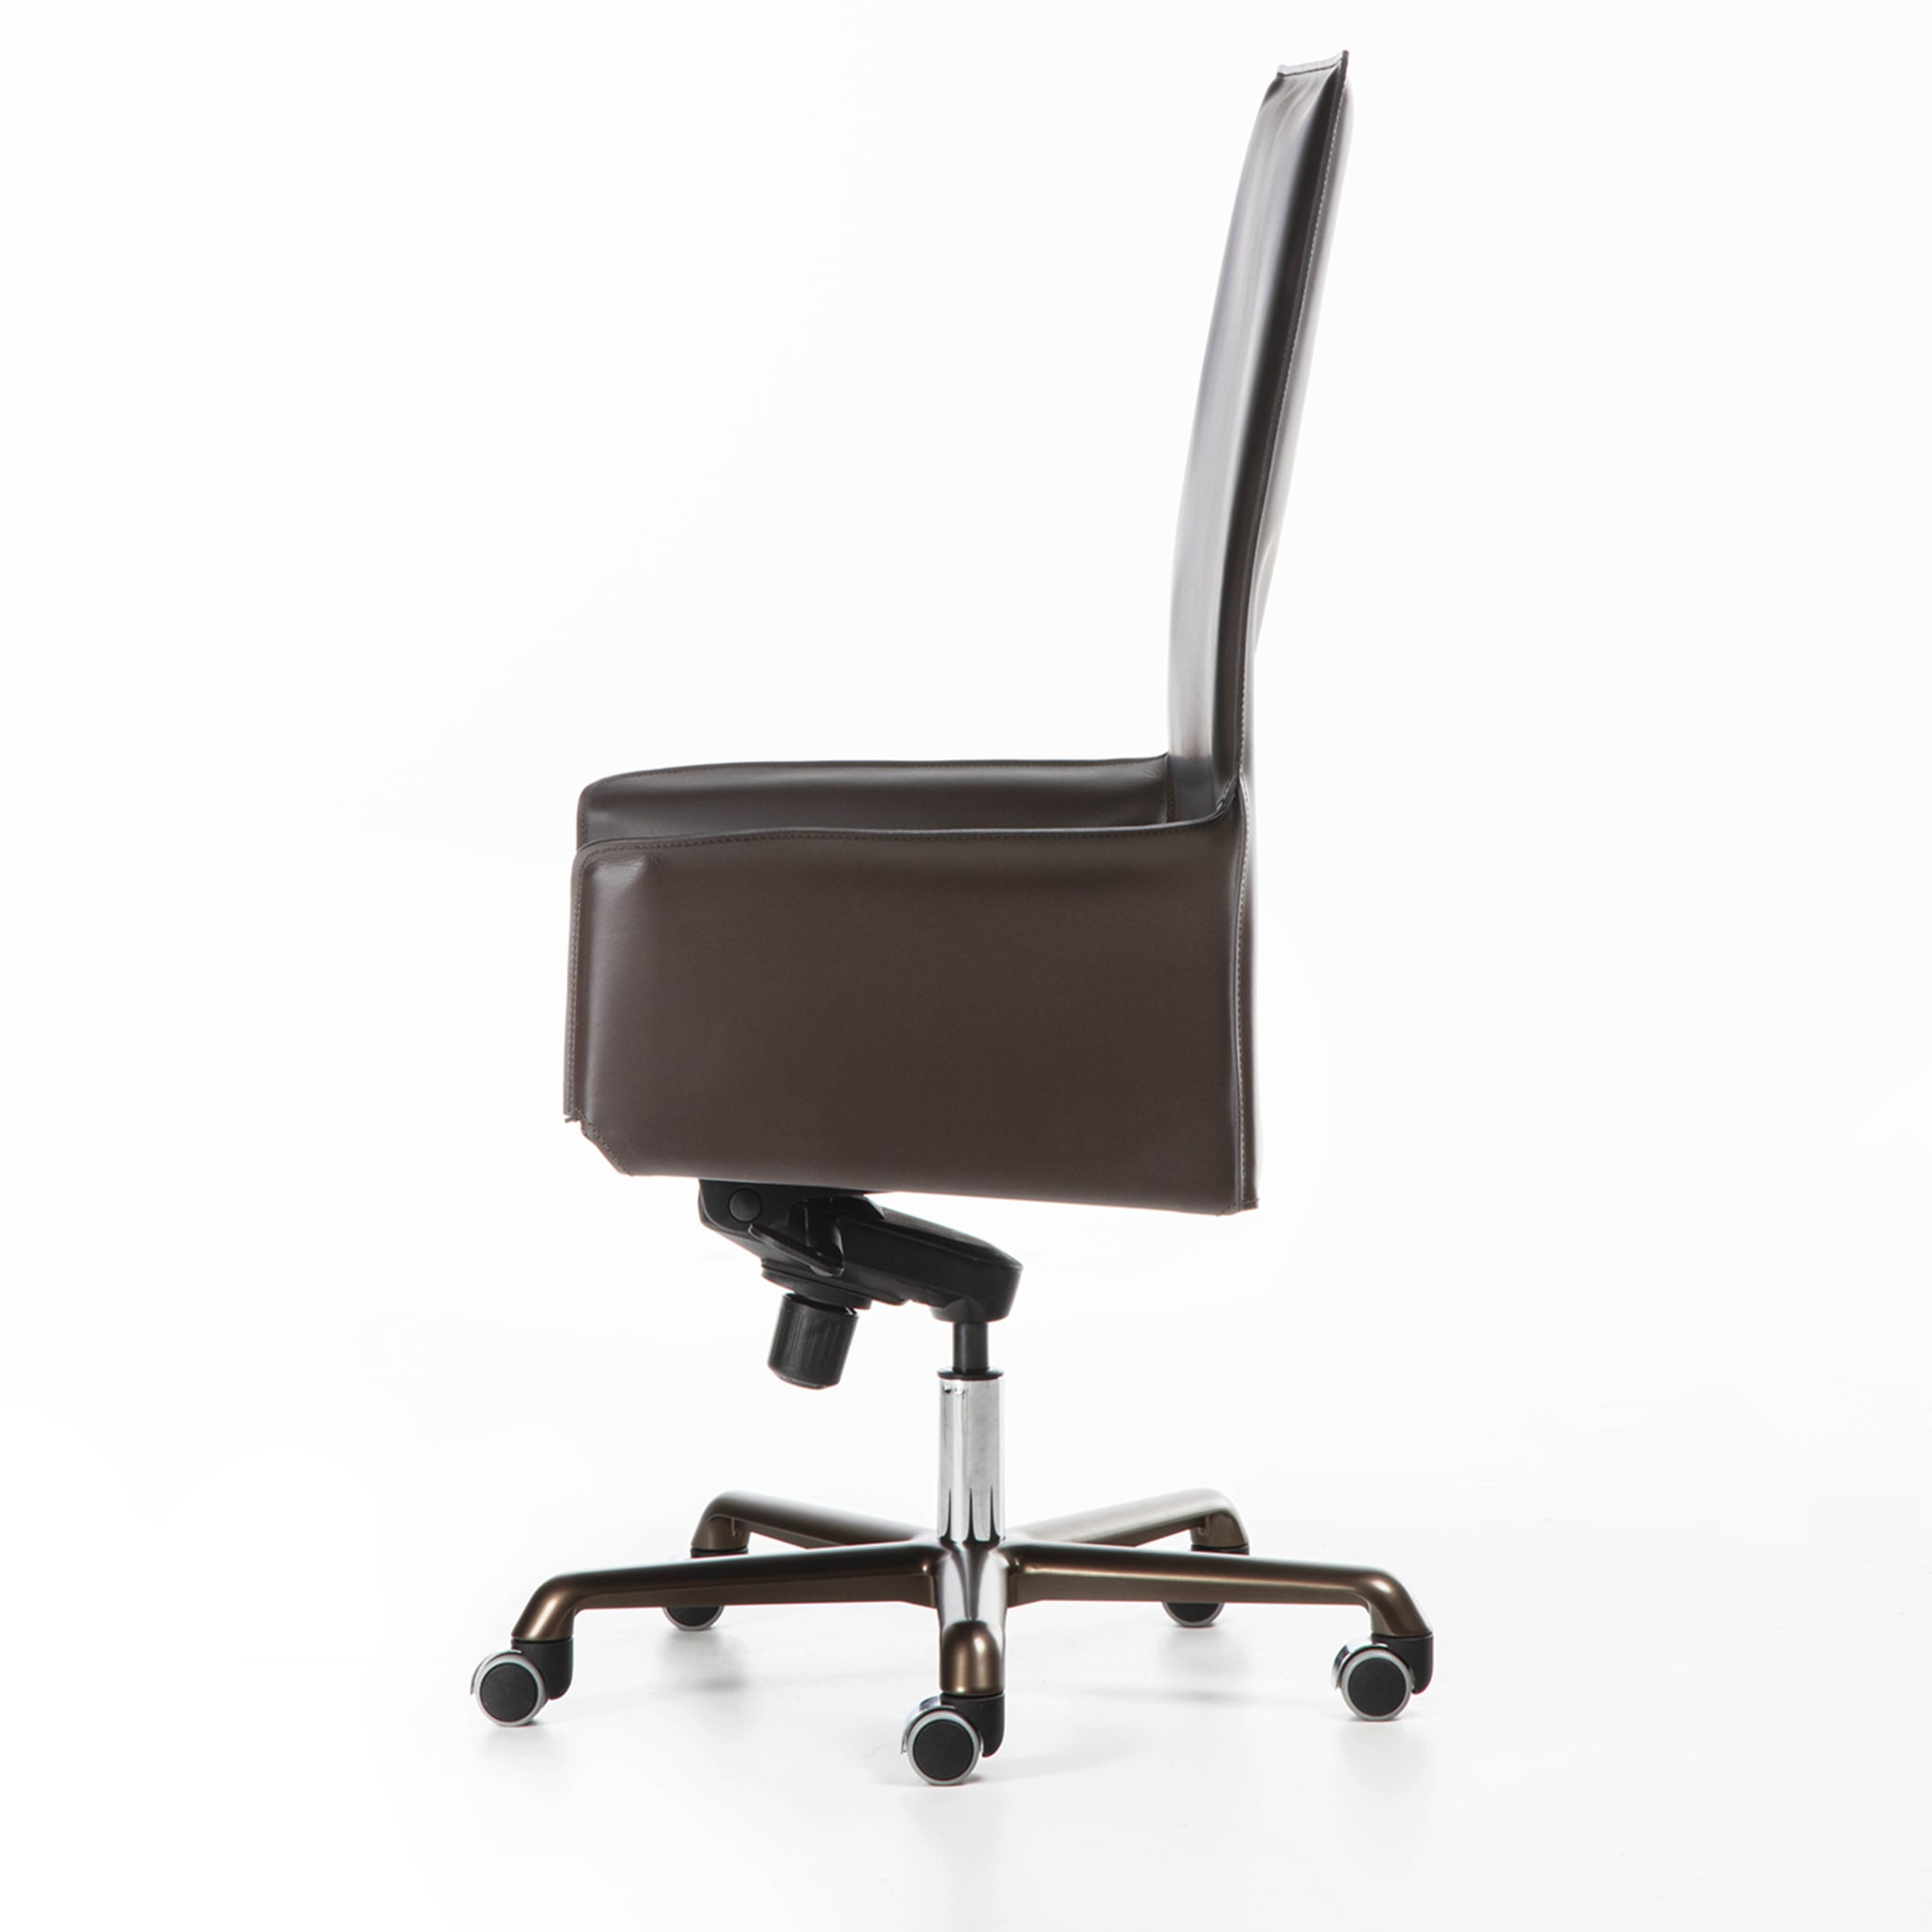 Pasqualina Swivel President Chair by Grassi&Bianchi and RedCreative - Alternative view 2